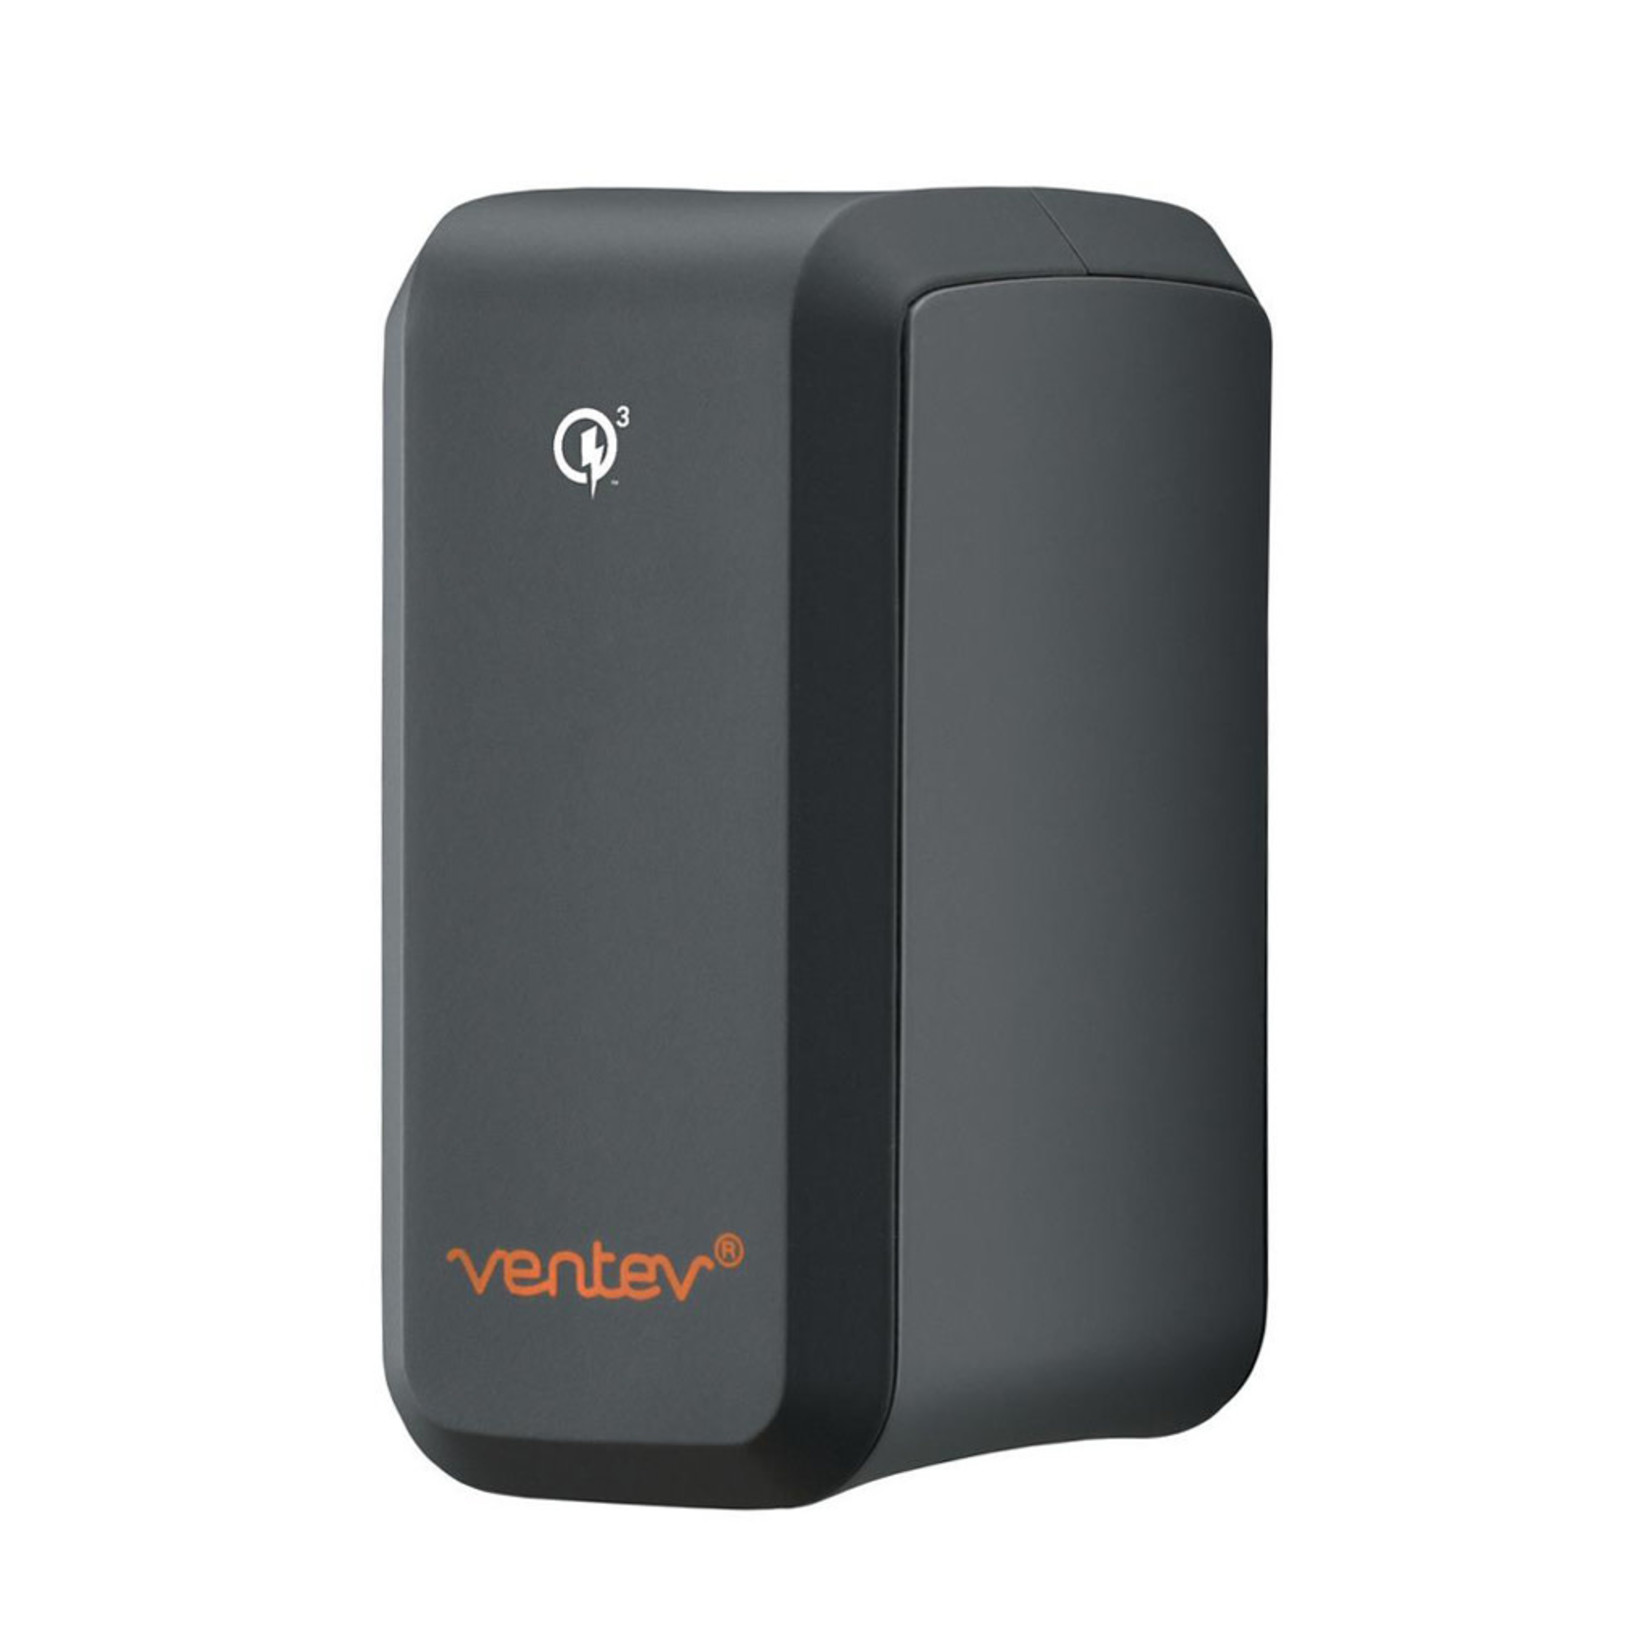 Ventev Wallport rq2300 Dual USB Qualcomm Quick Charge 3.0 Home Wall Charger Adapter